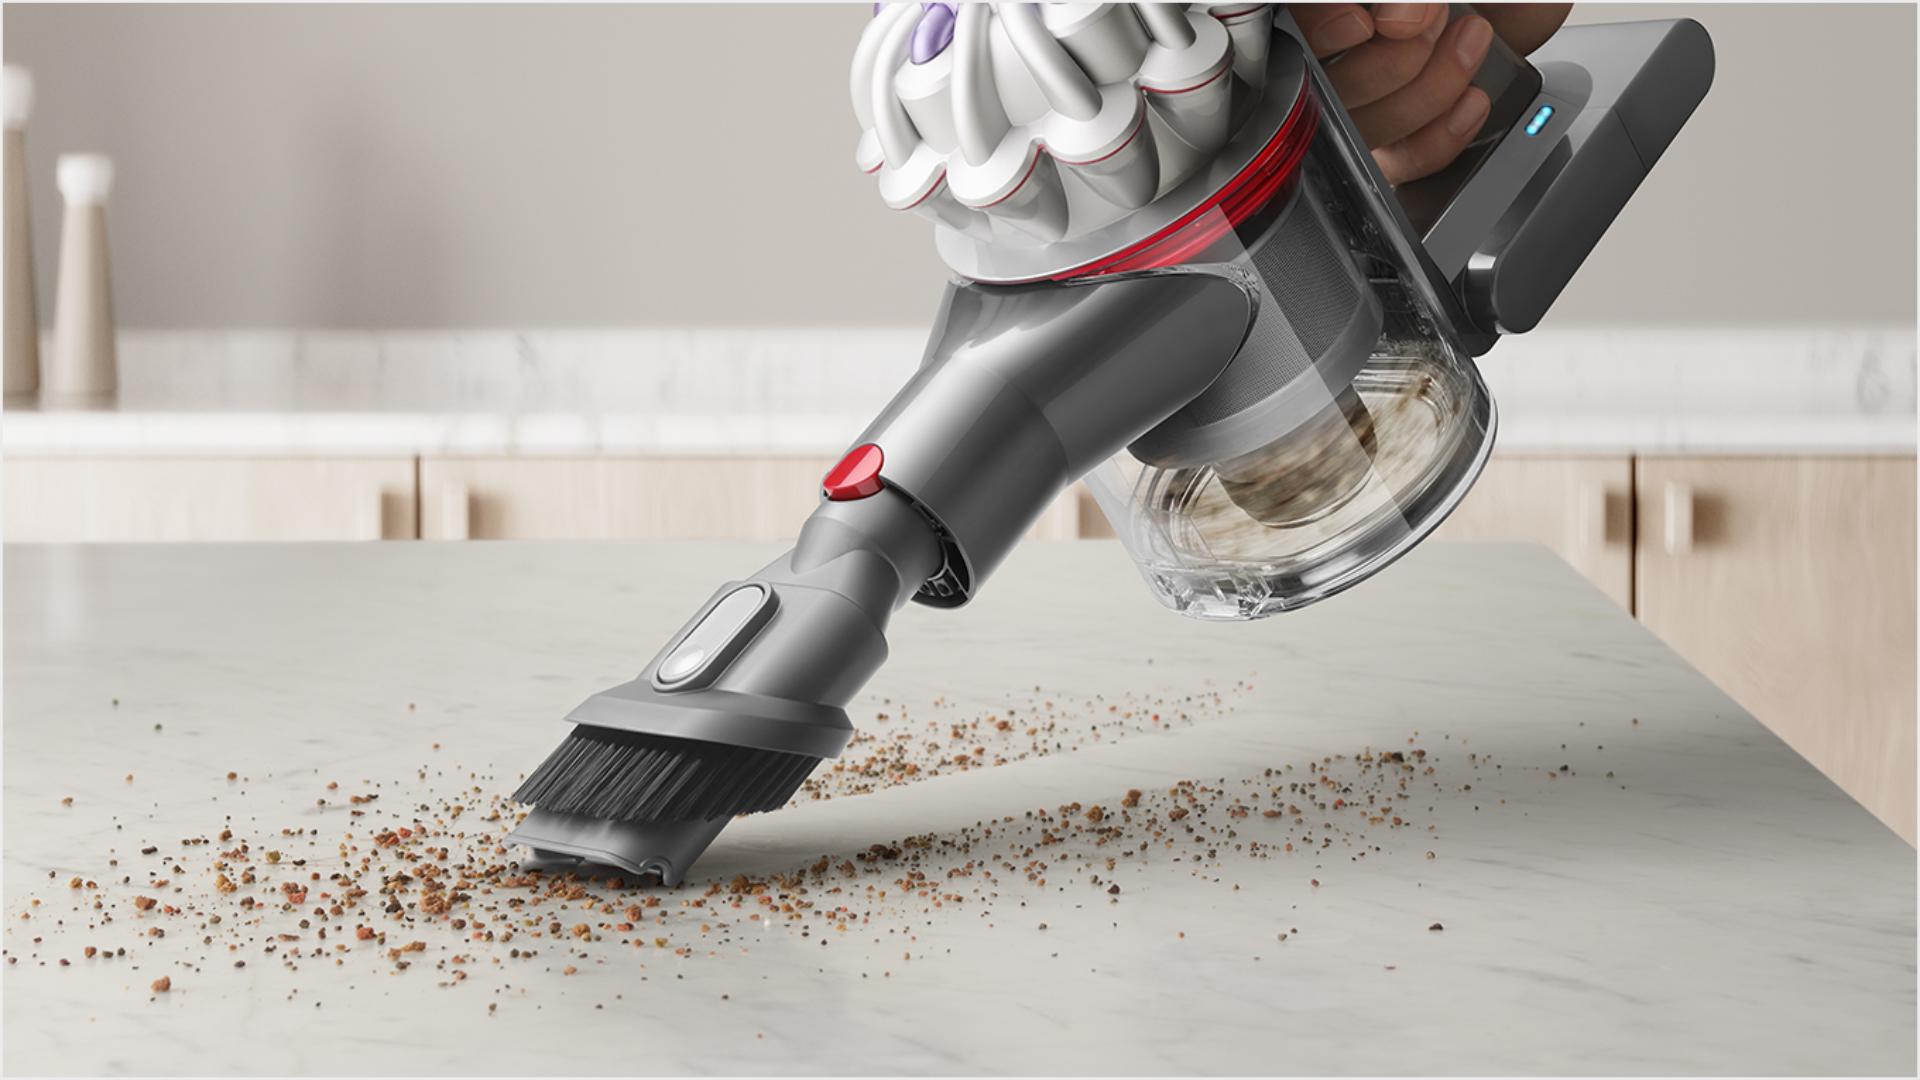 User cleaning crumbs from a kitchen countertop, with the Combination tool attachment.